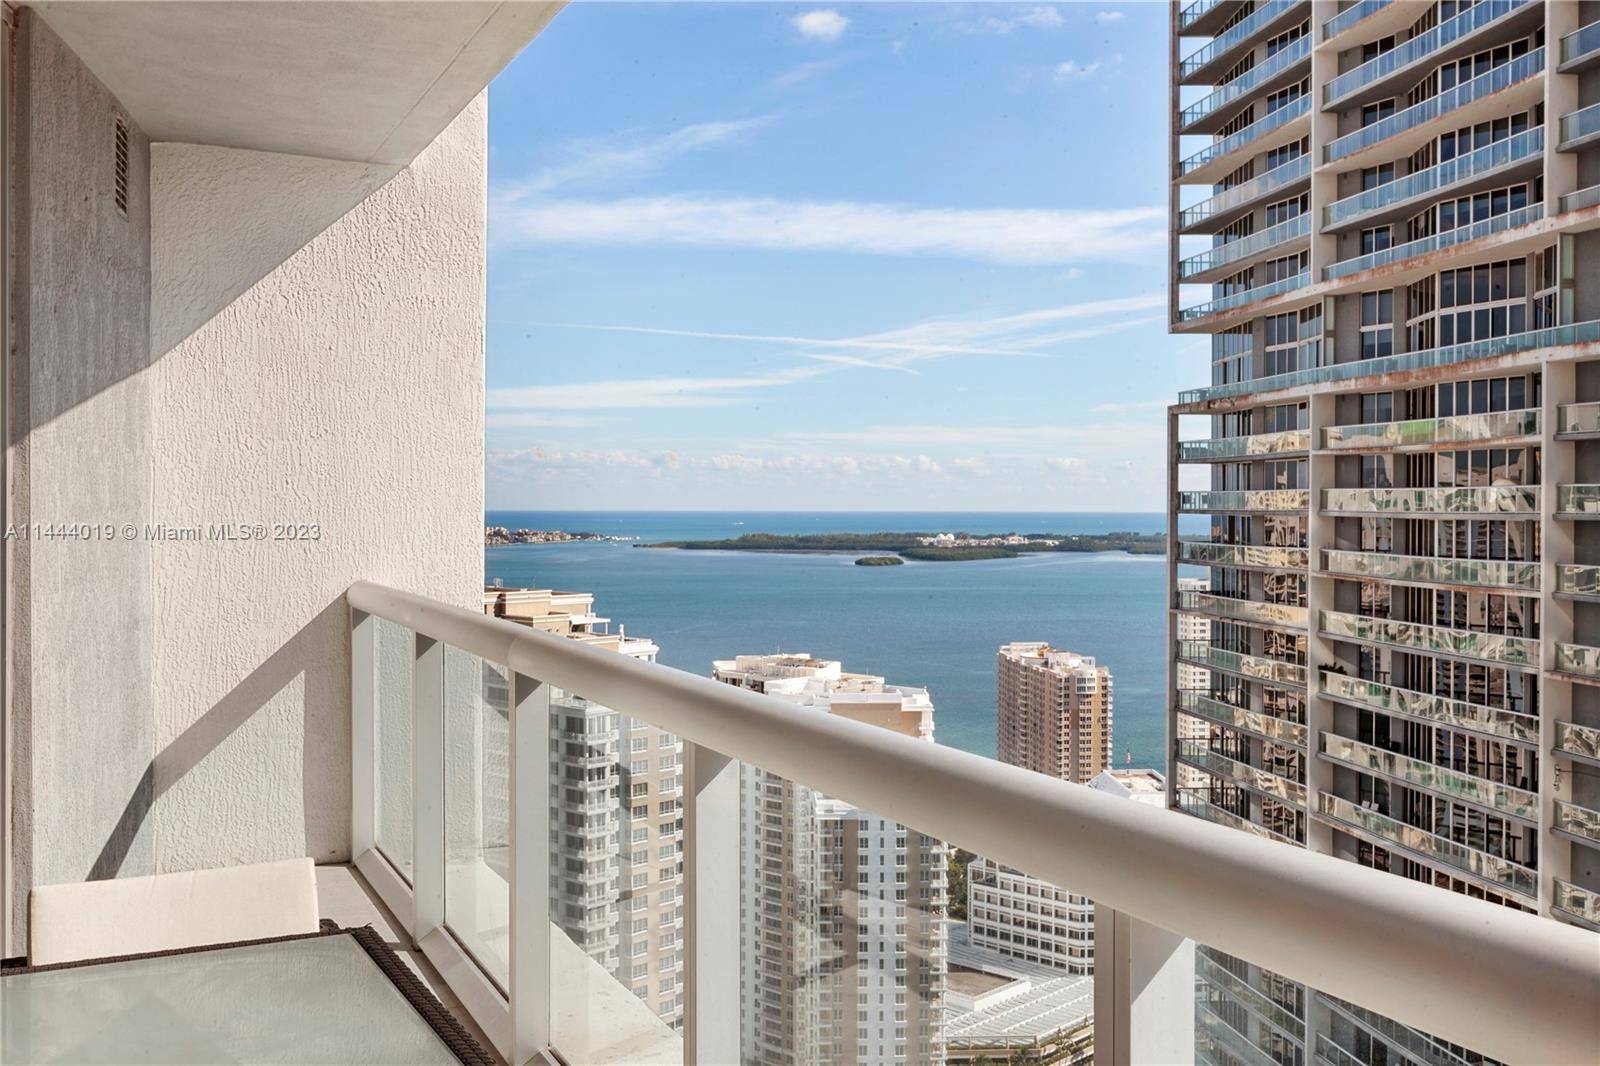 Elegance meets City living in this stunning 2 Bed, 2 Bath condo at the center of Brickell.